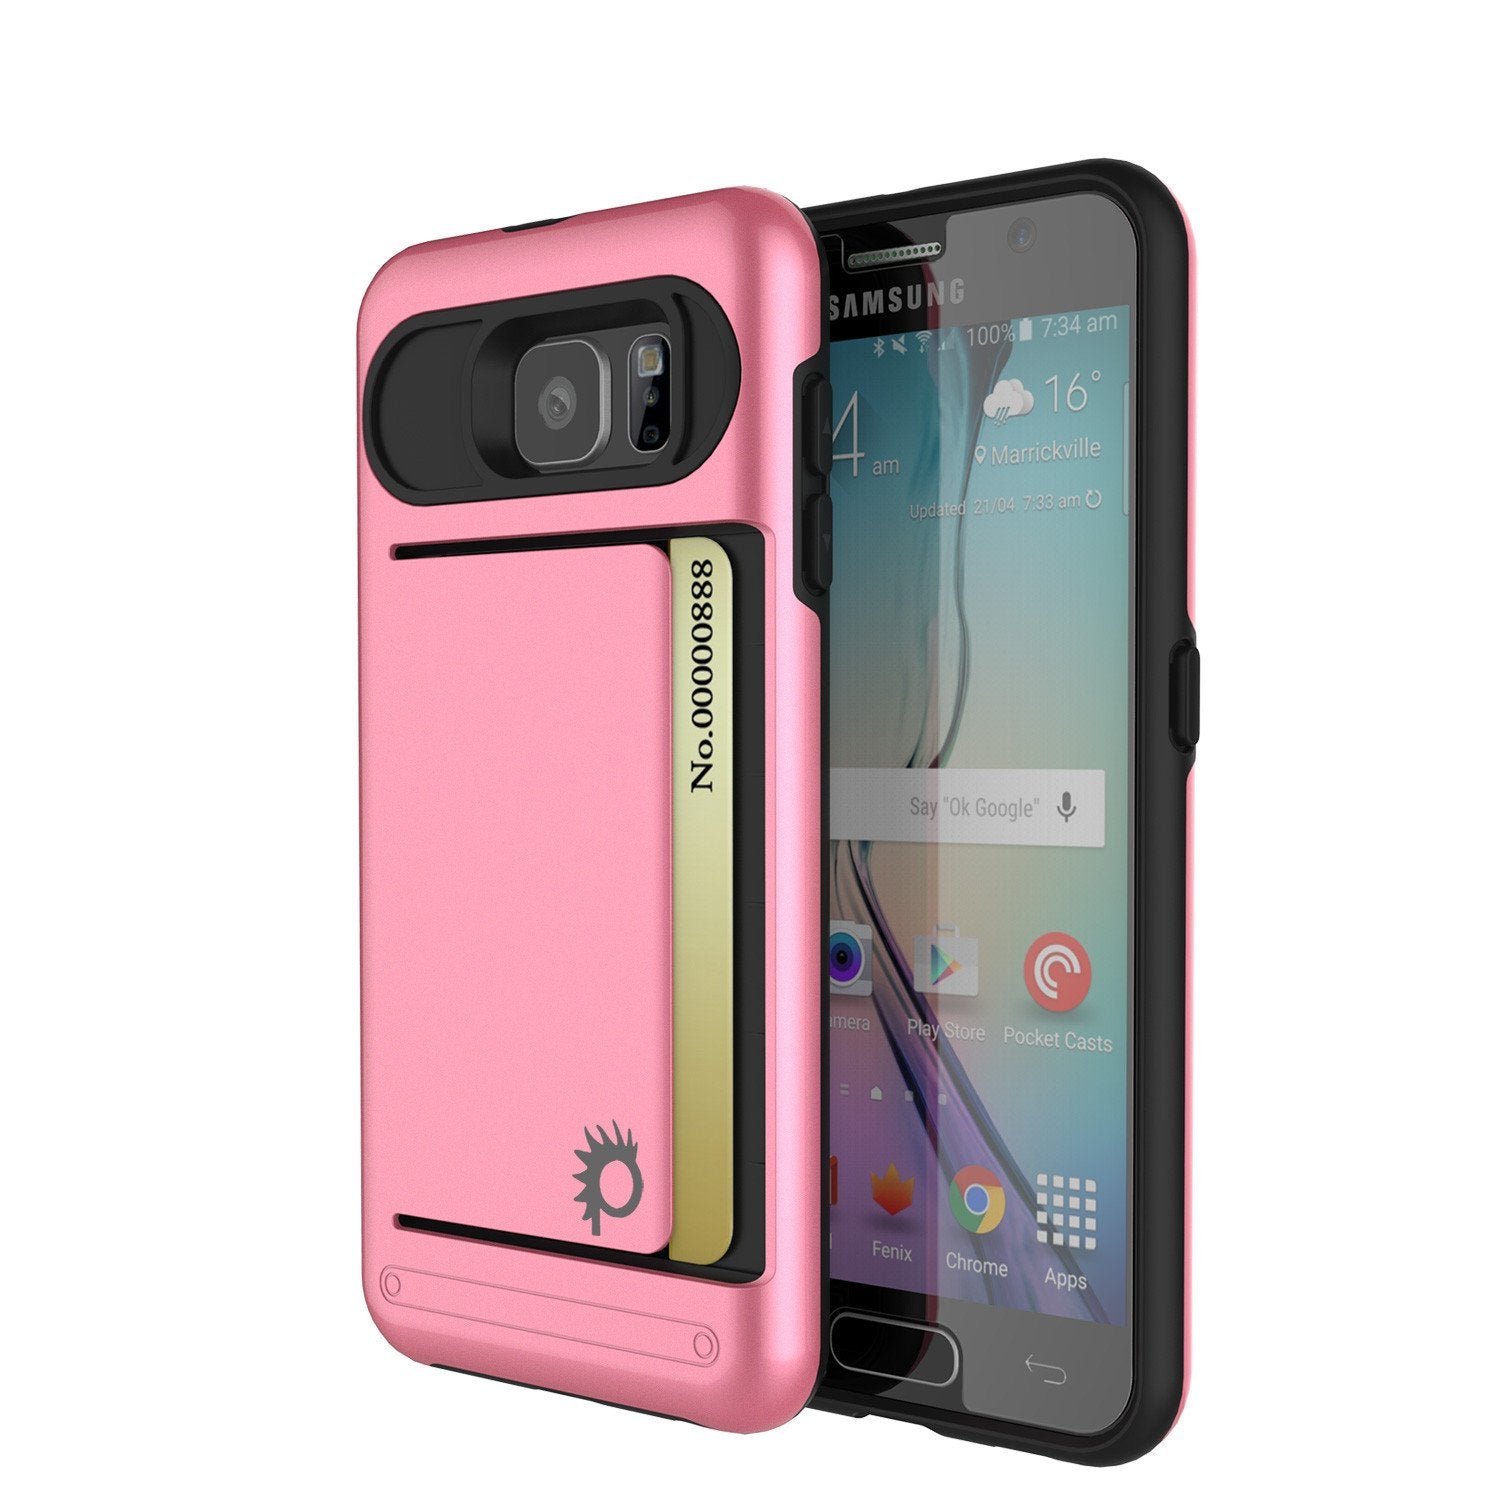 Galaxy S6 EDGE Plus Case PunkCase CLUTCH Pink Series Slim Armor Soft Cover Case w/ Screen Protector - PunkCase NZ